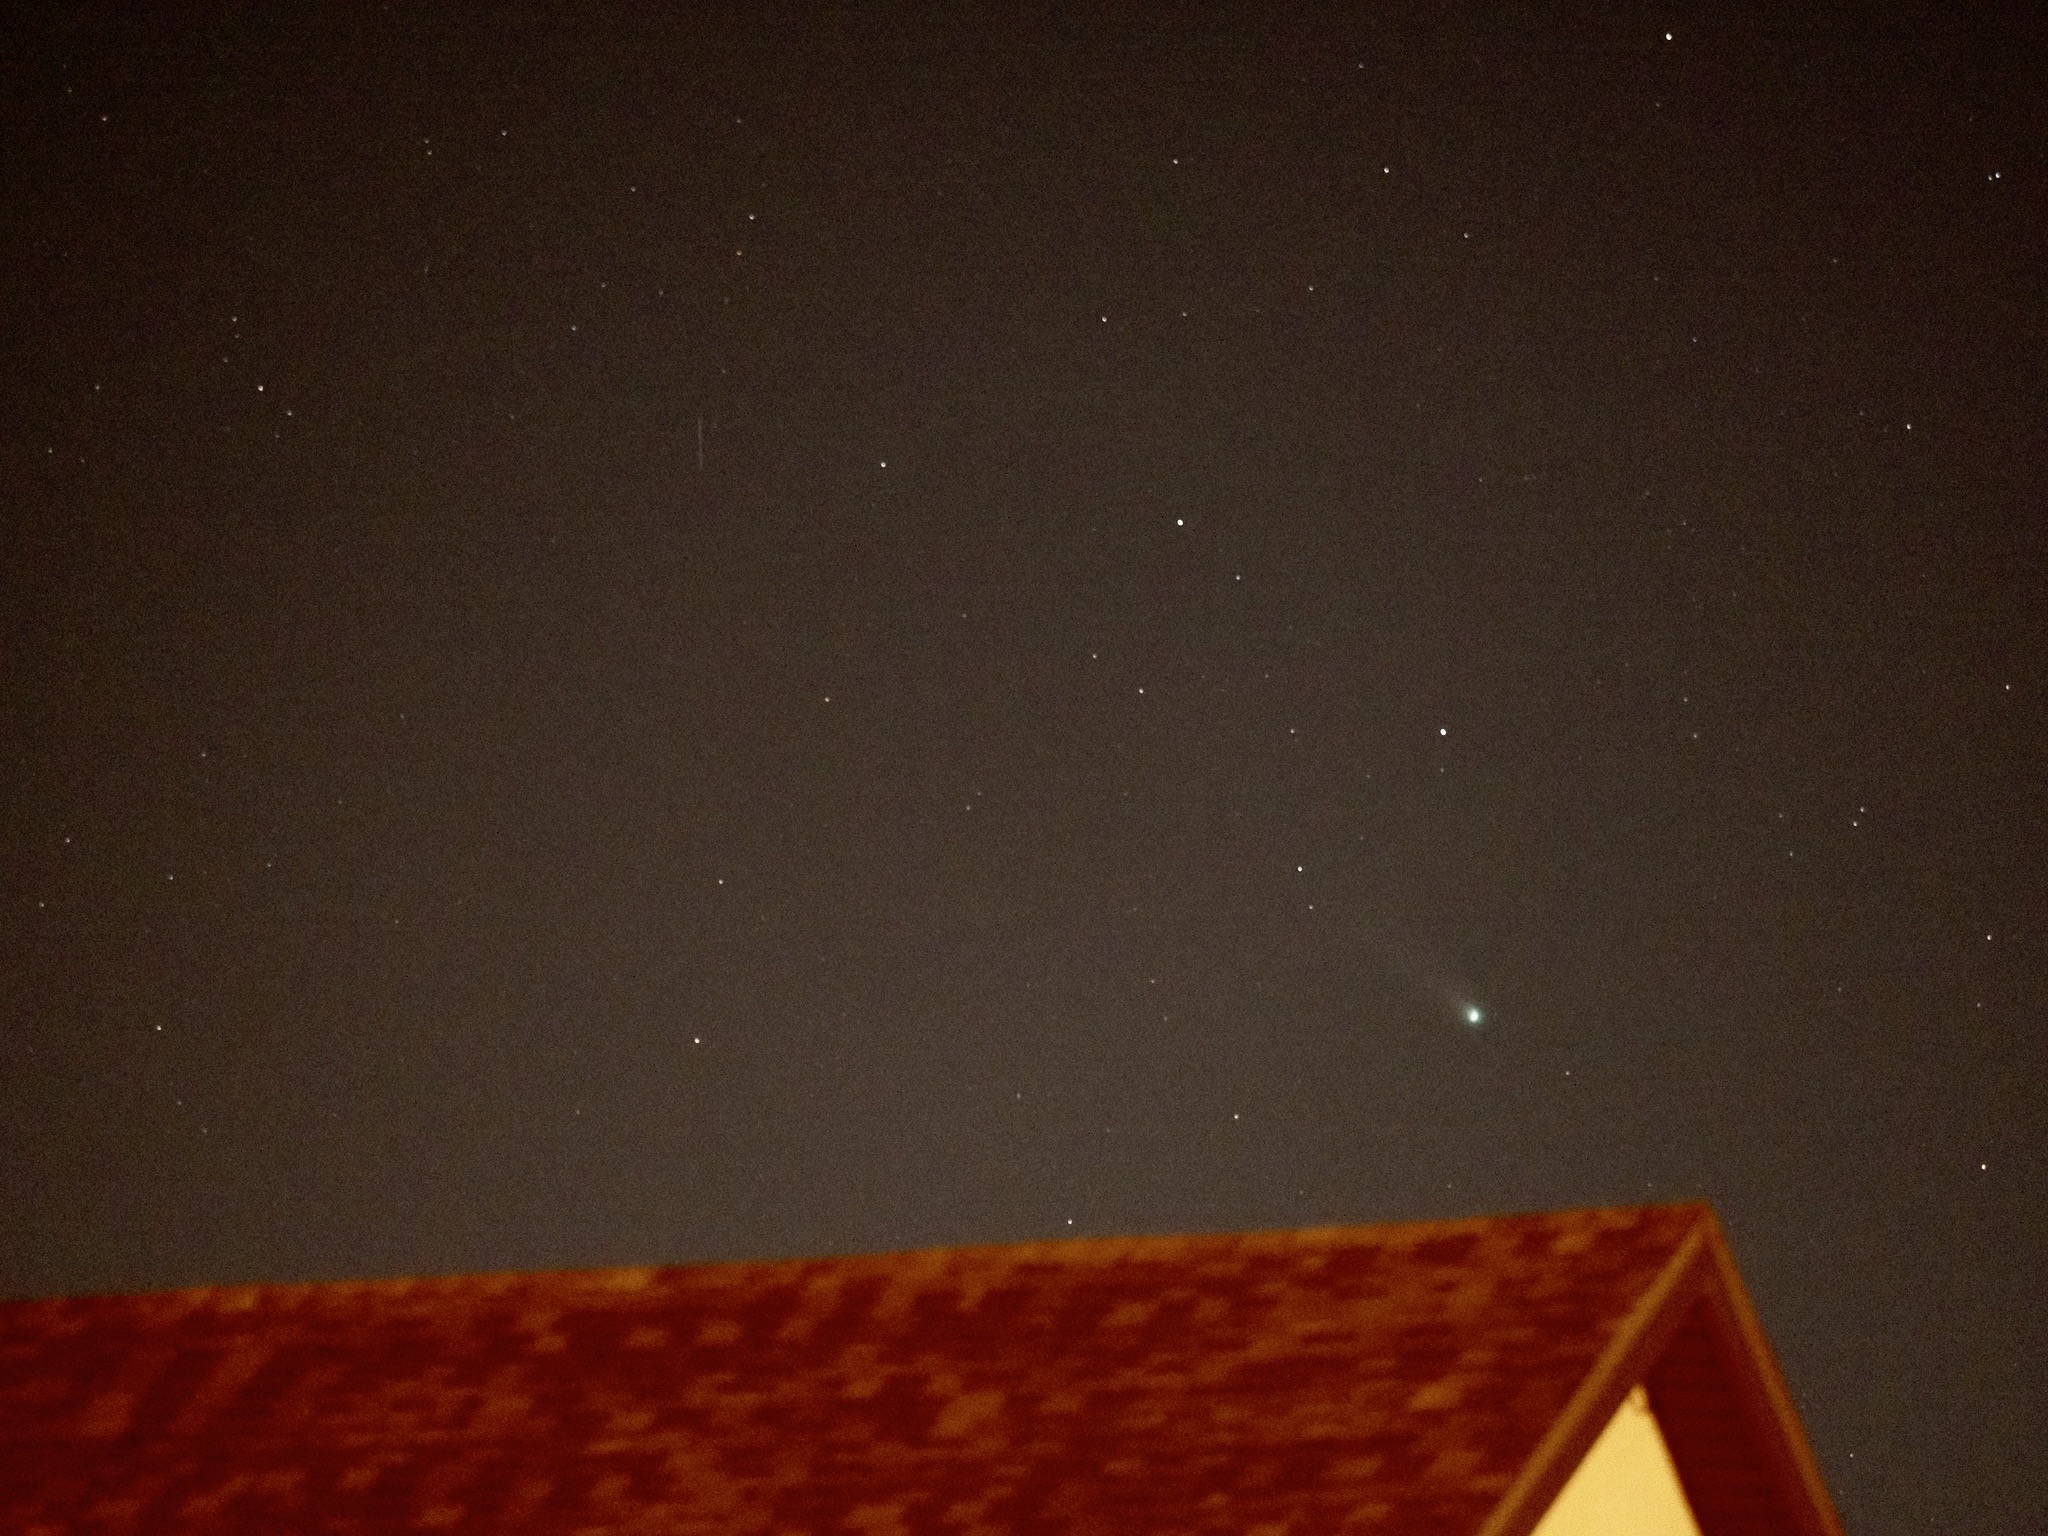 Comet Leonard over the roof of the house across the street.